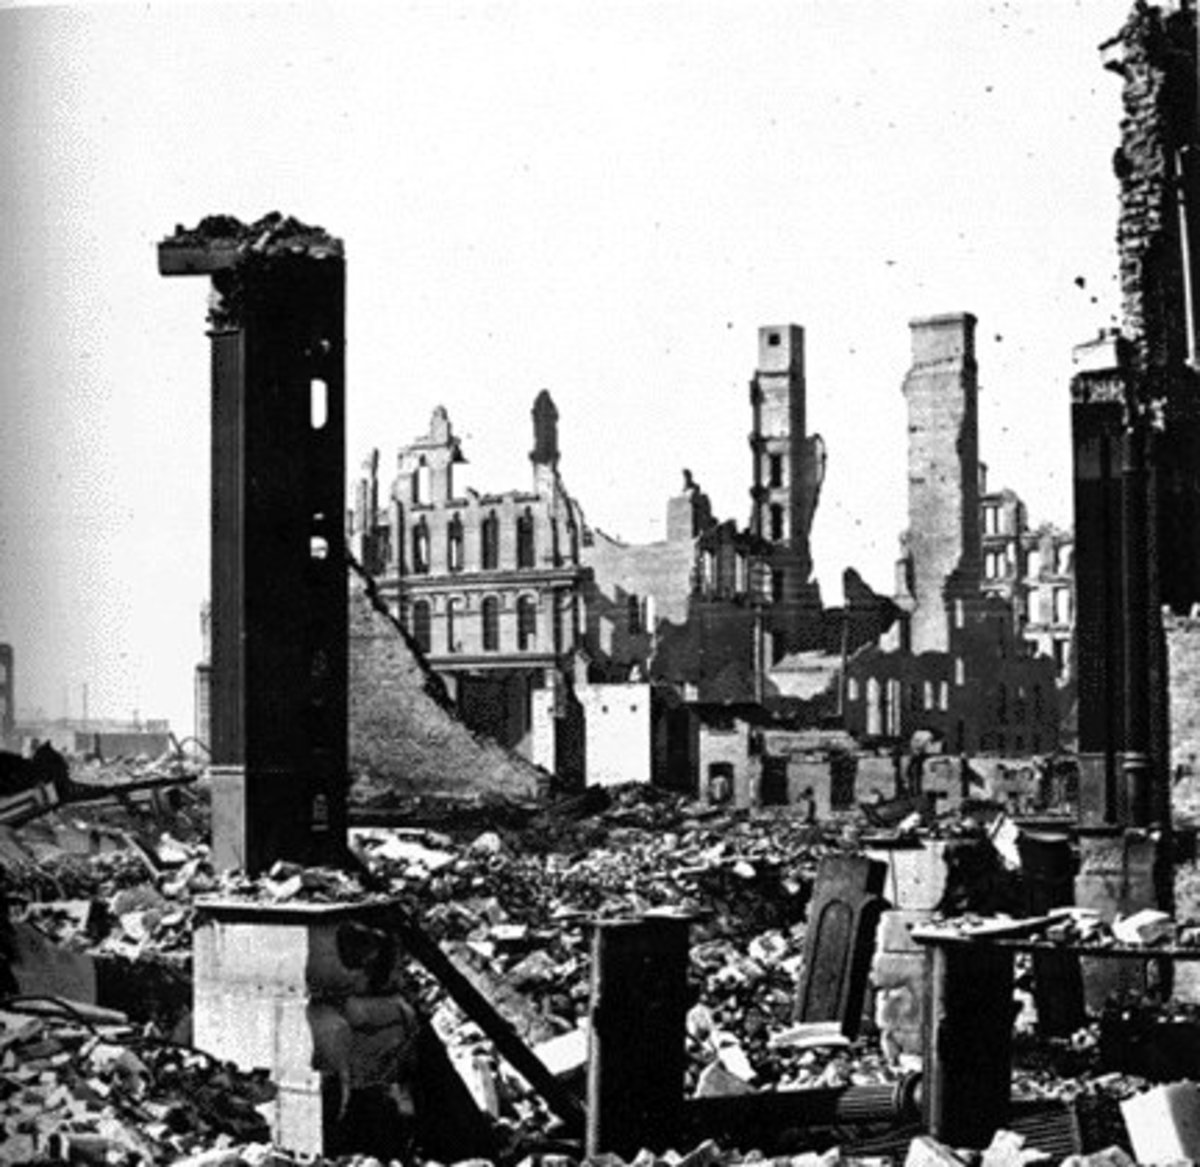 AFTERMATH OF GREAT CHICAGO FIRE (DEARBORN & MONROE)